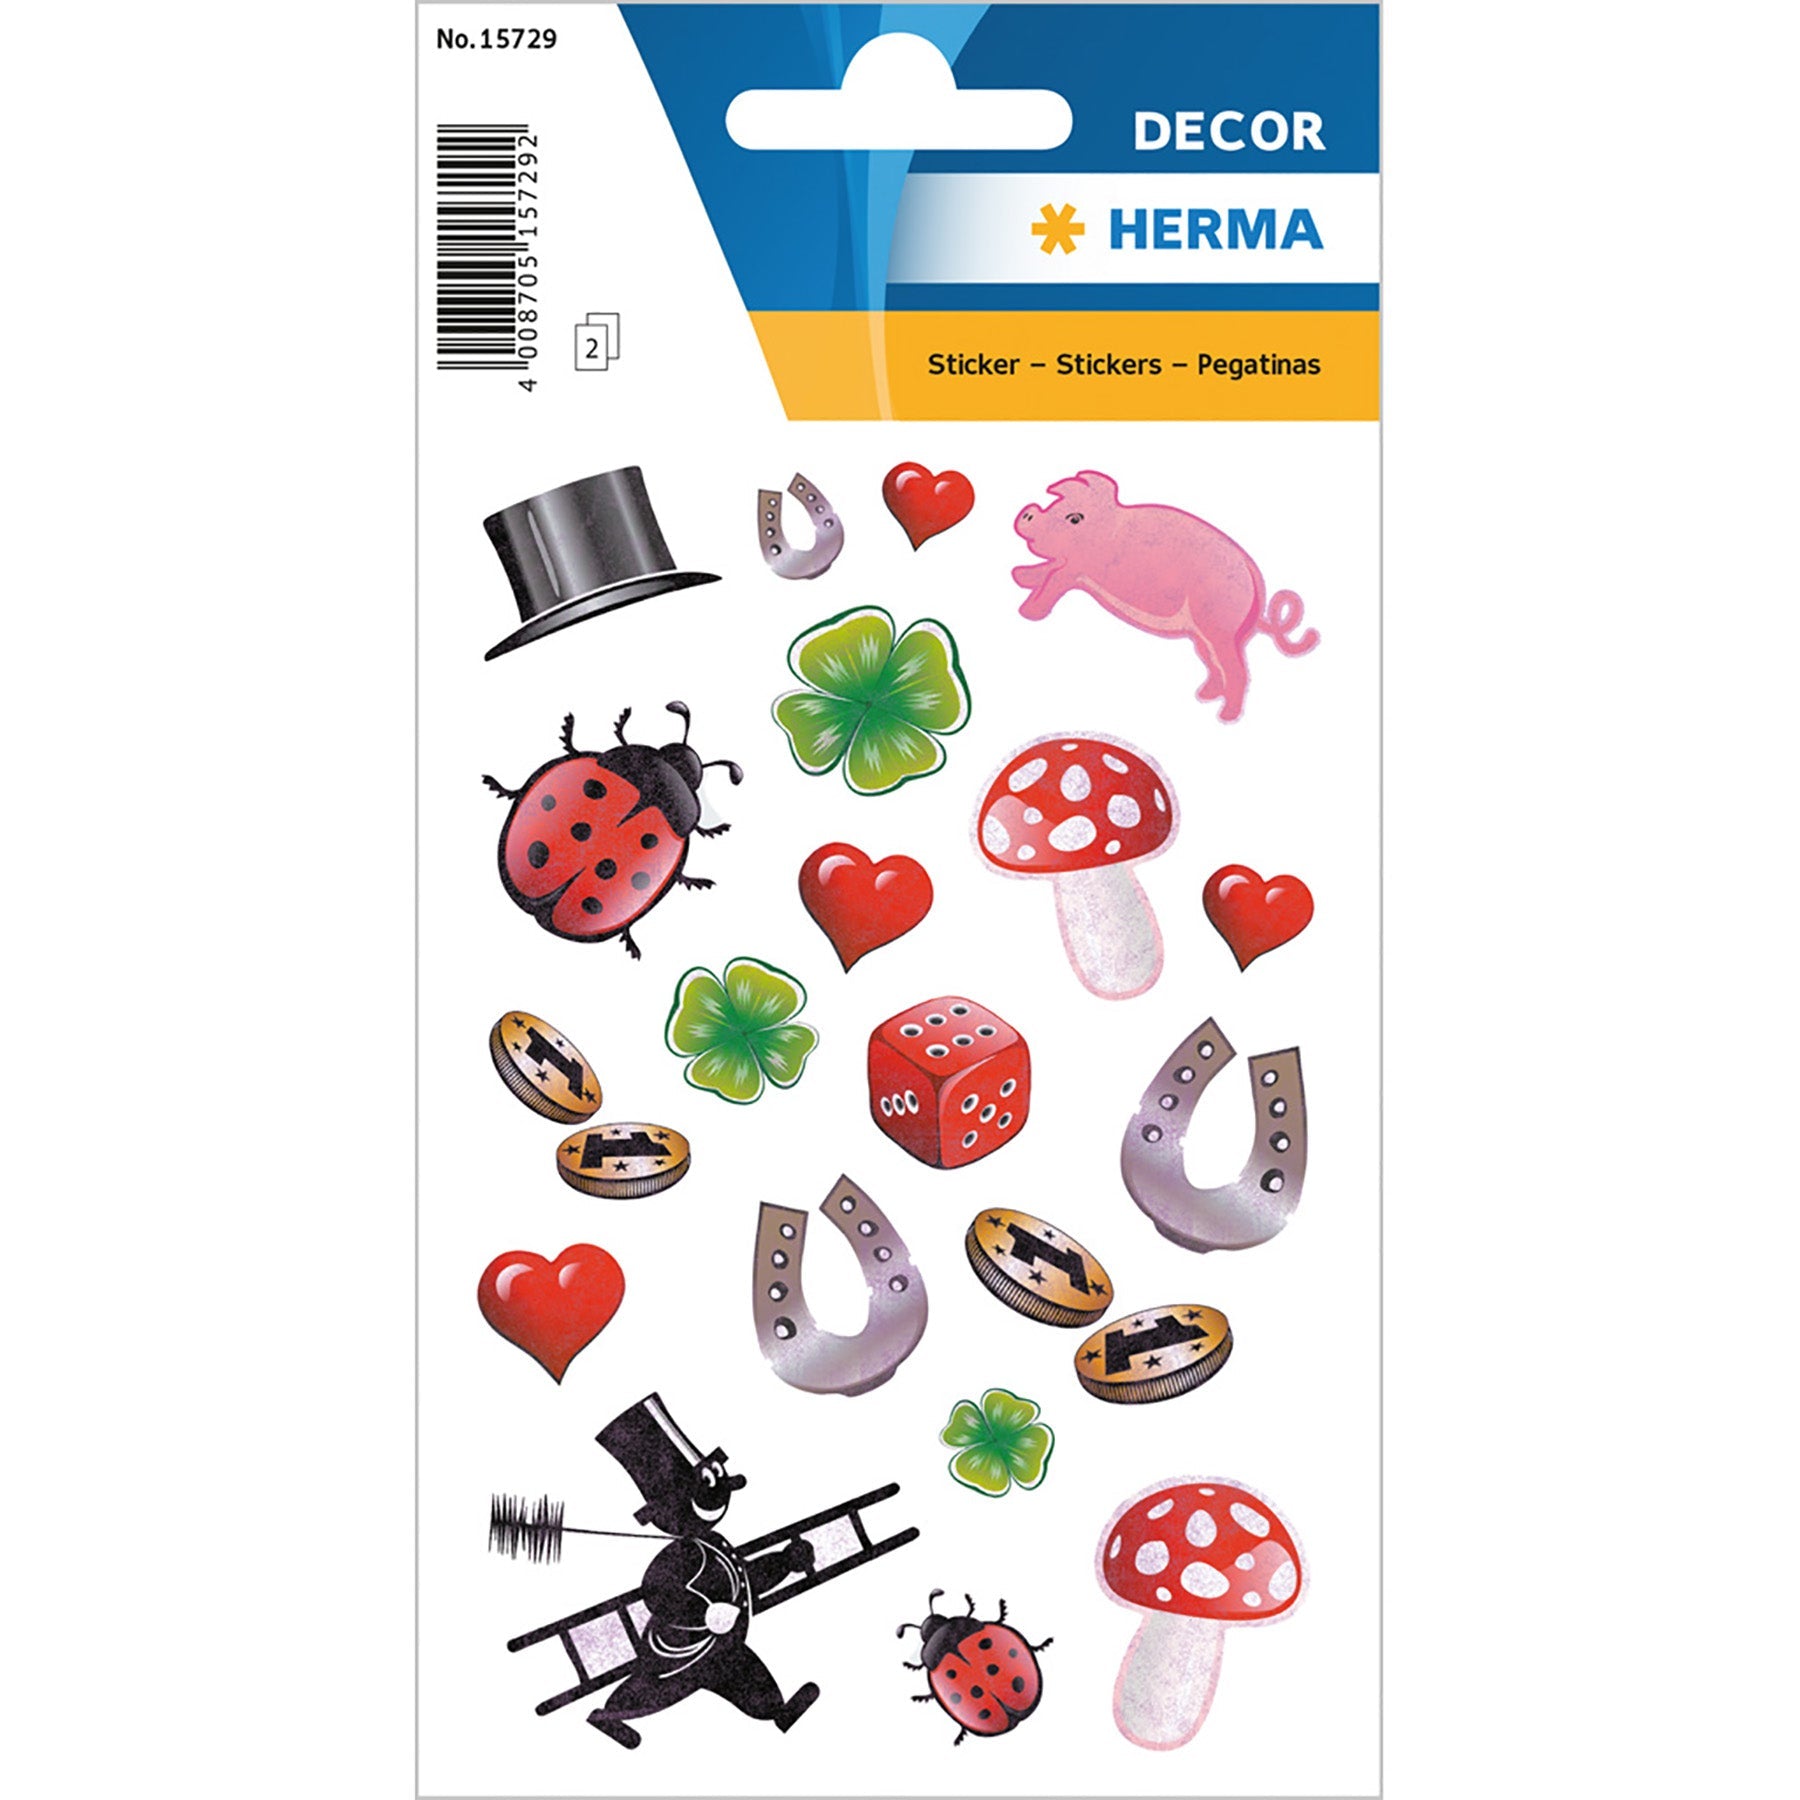 Herma Décor 2 Sheets Stickers Lucky Symbols 4.75x3.1in Sheet